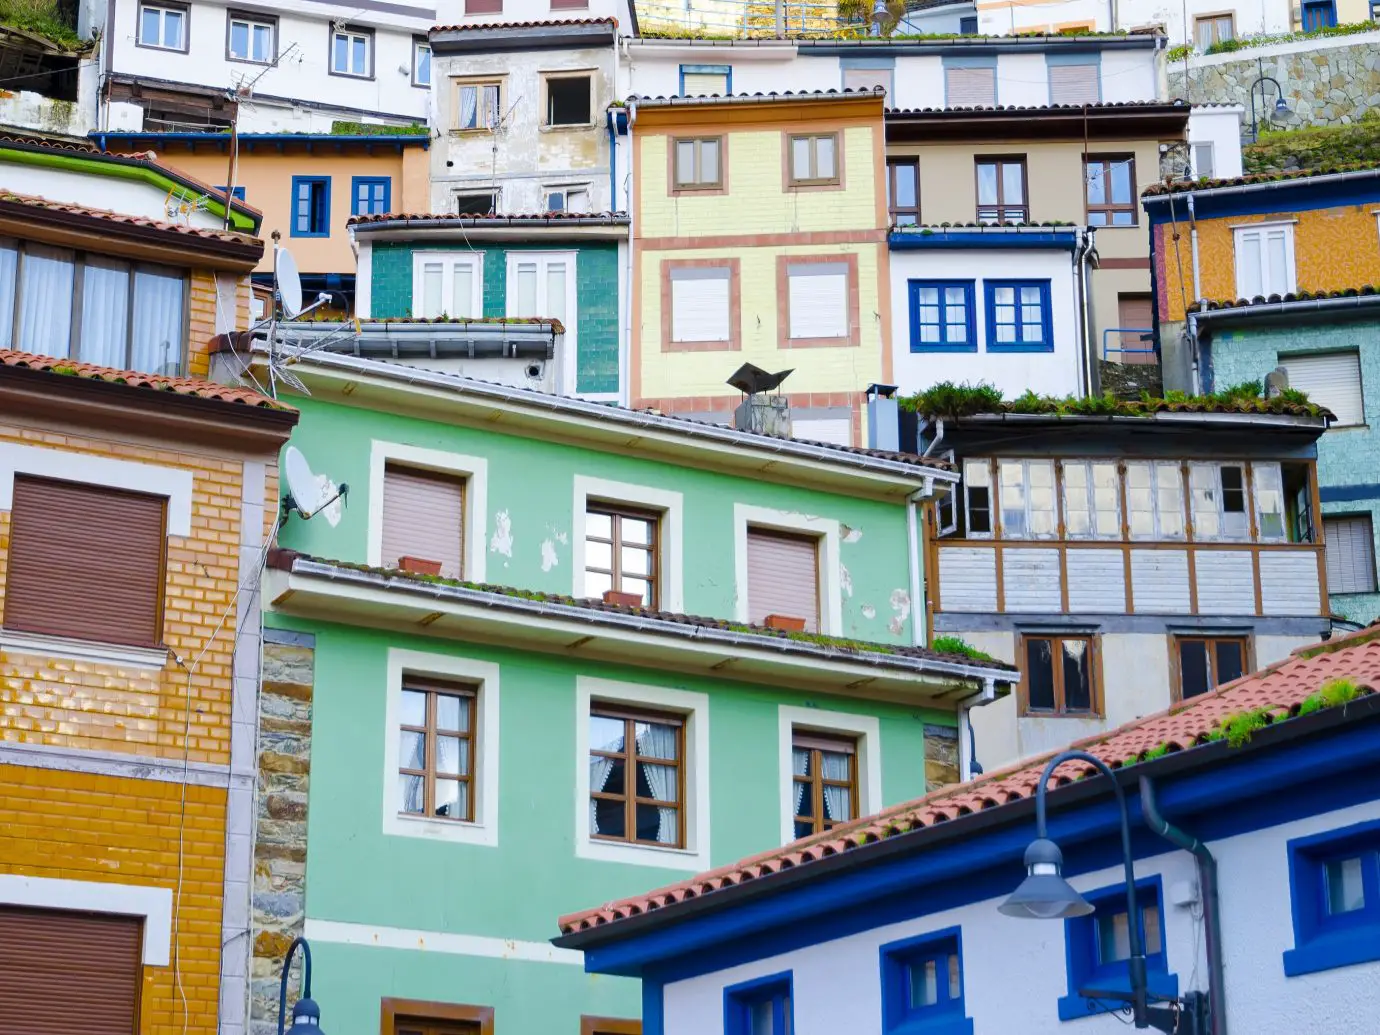 Colorful houses showcasing Spanish architectural features on a hillside.